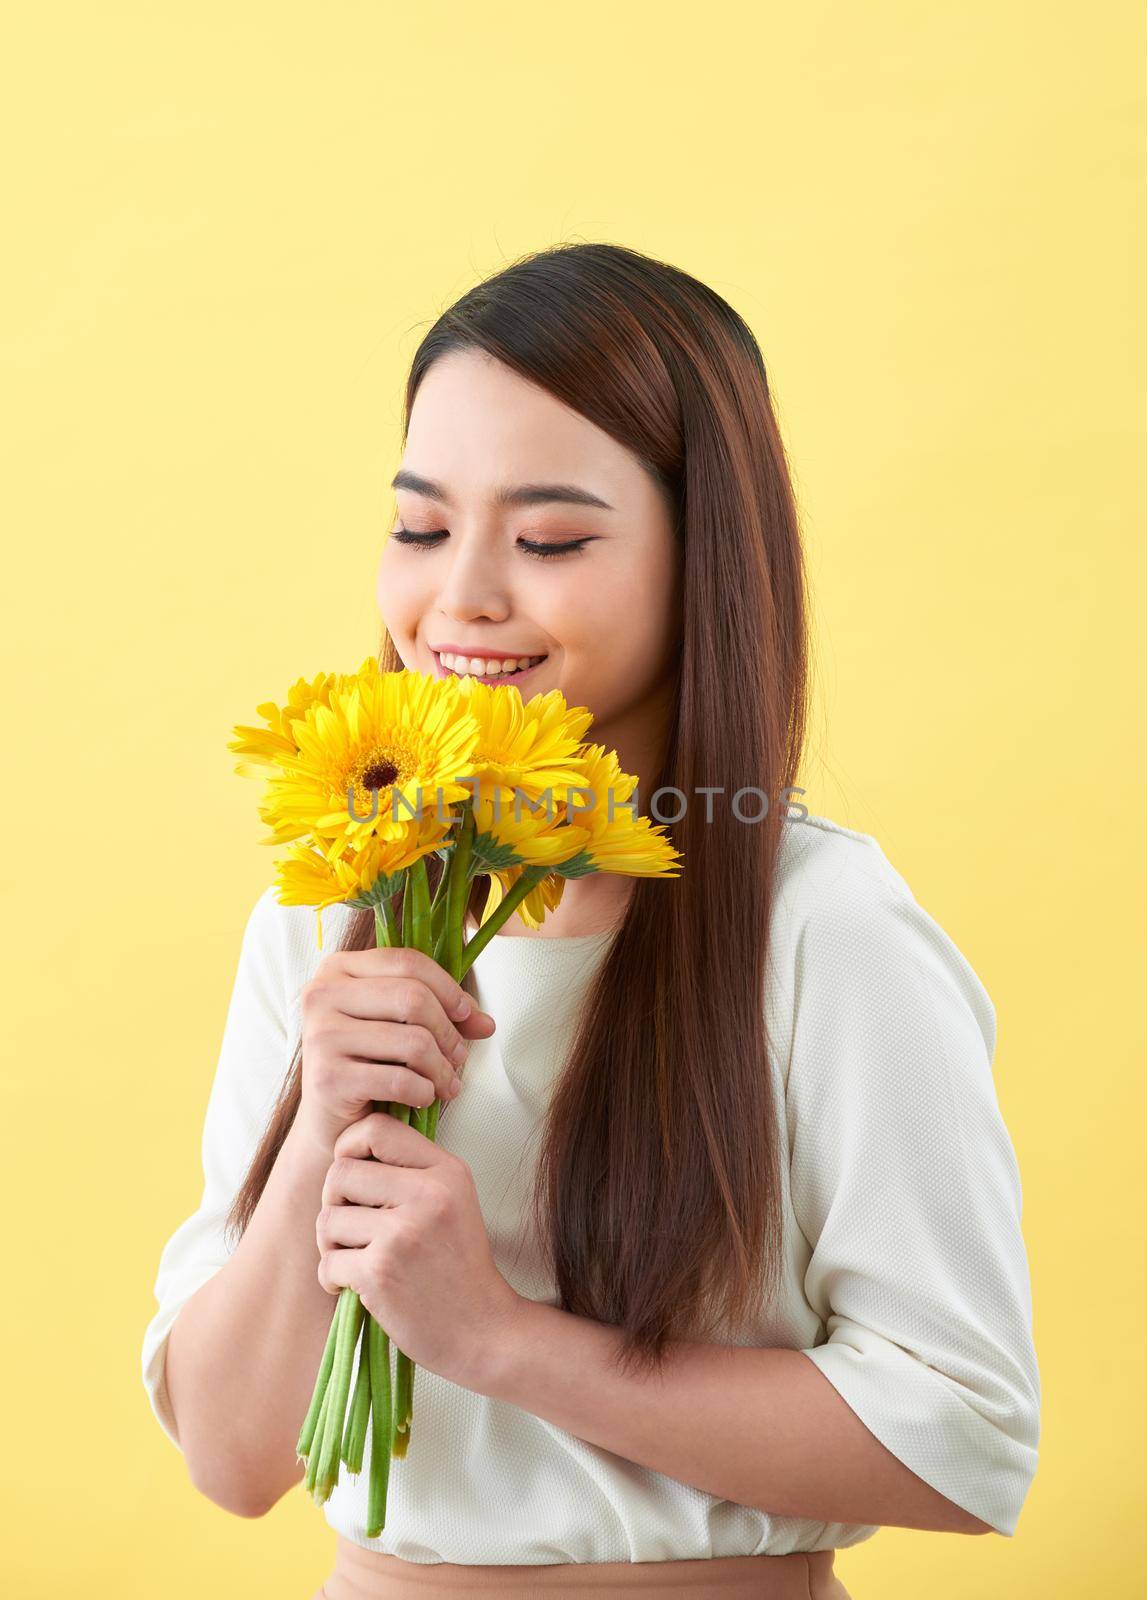 young woman smelling sunflowers on the yellow background by makidotvn